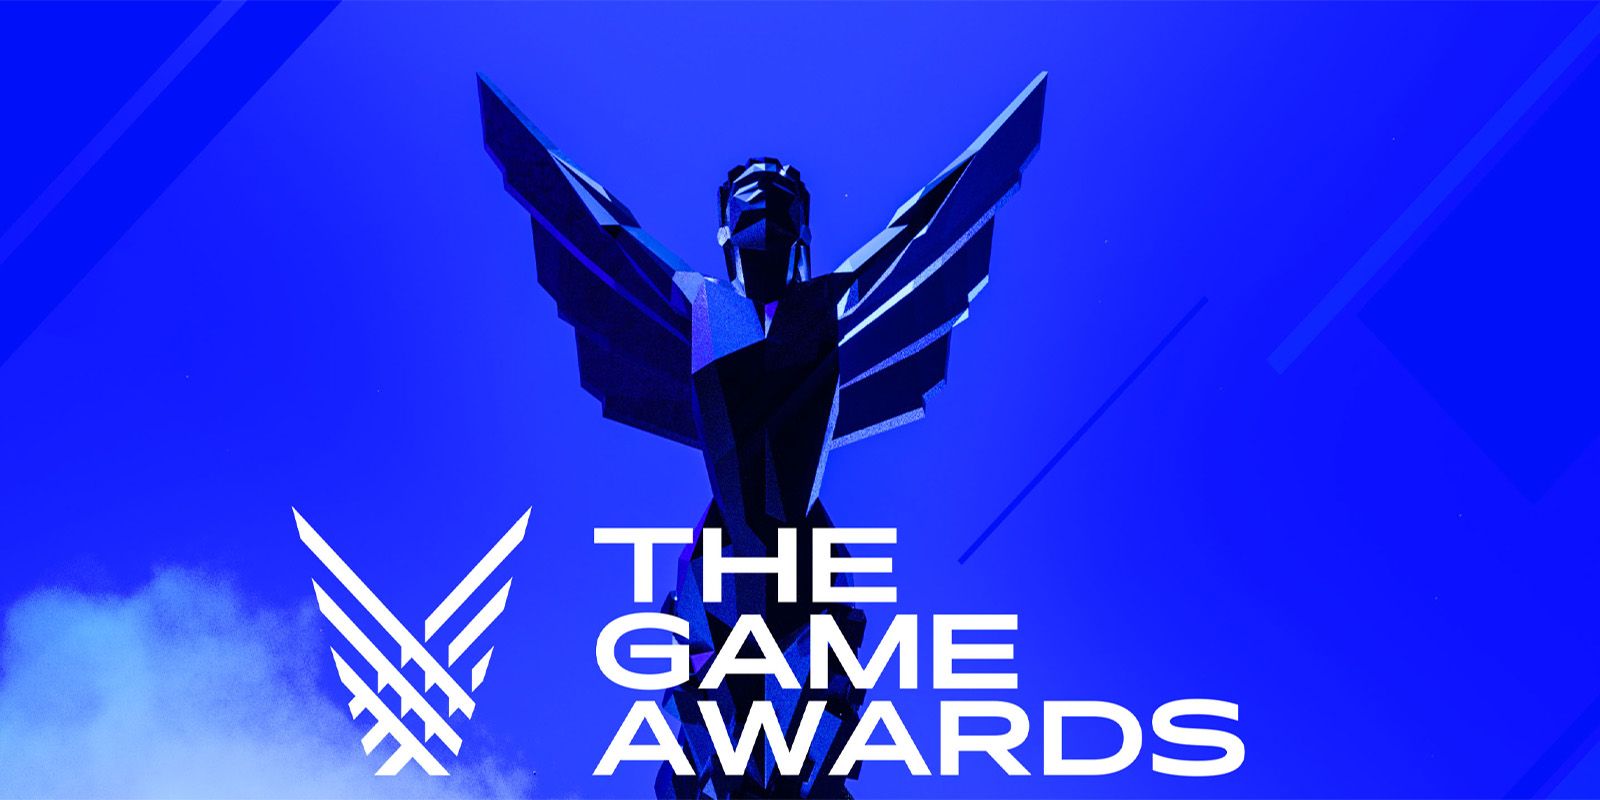 How The Game Awards Became One Of Gaming’s Most-Watched Shows